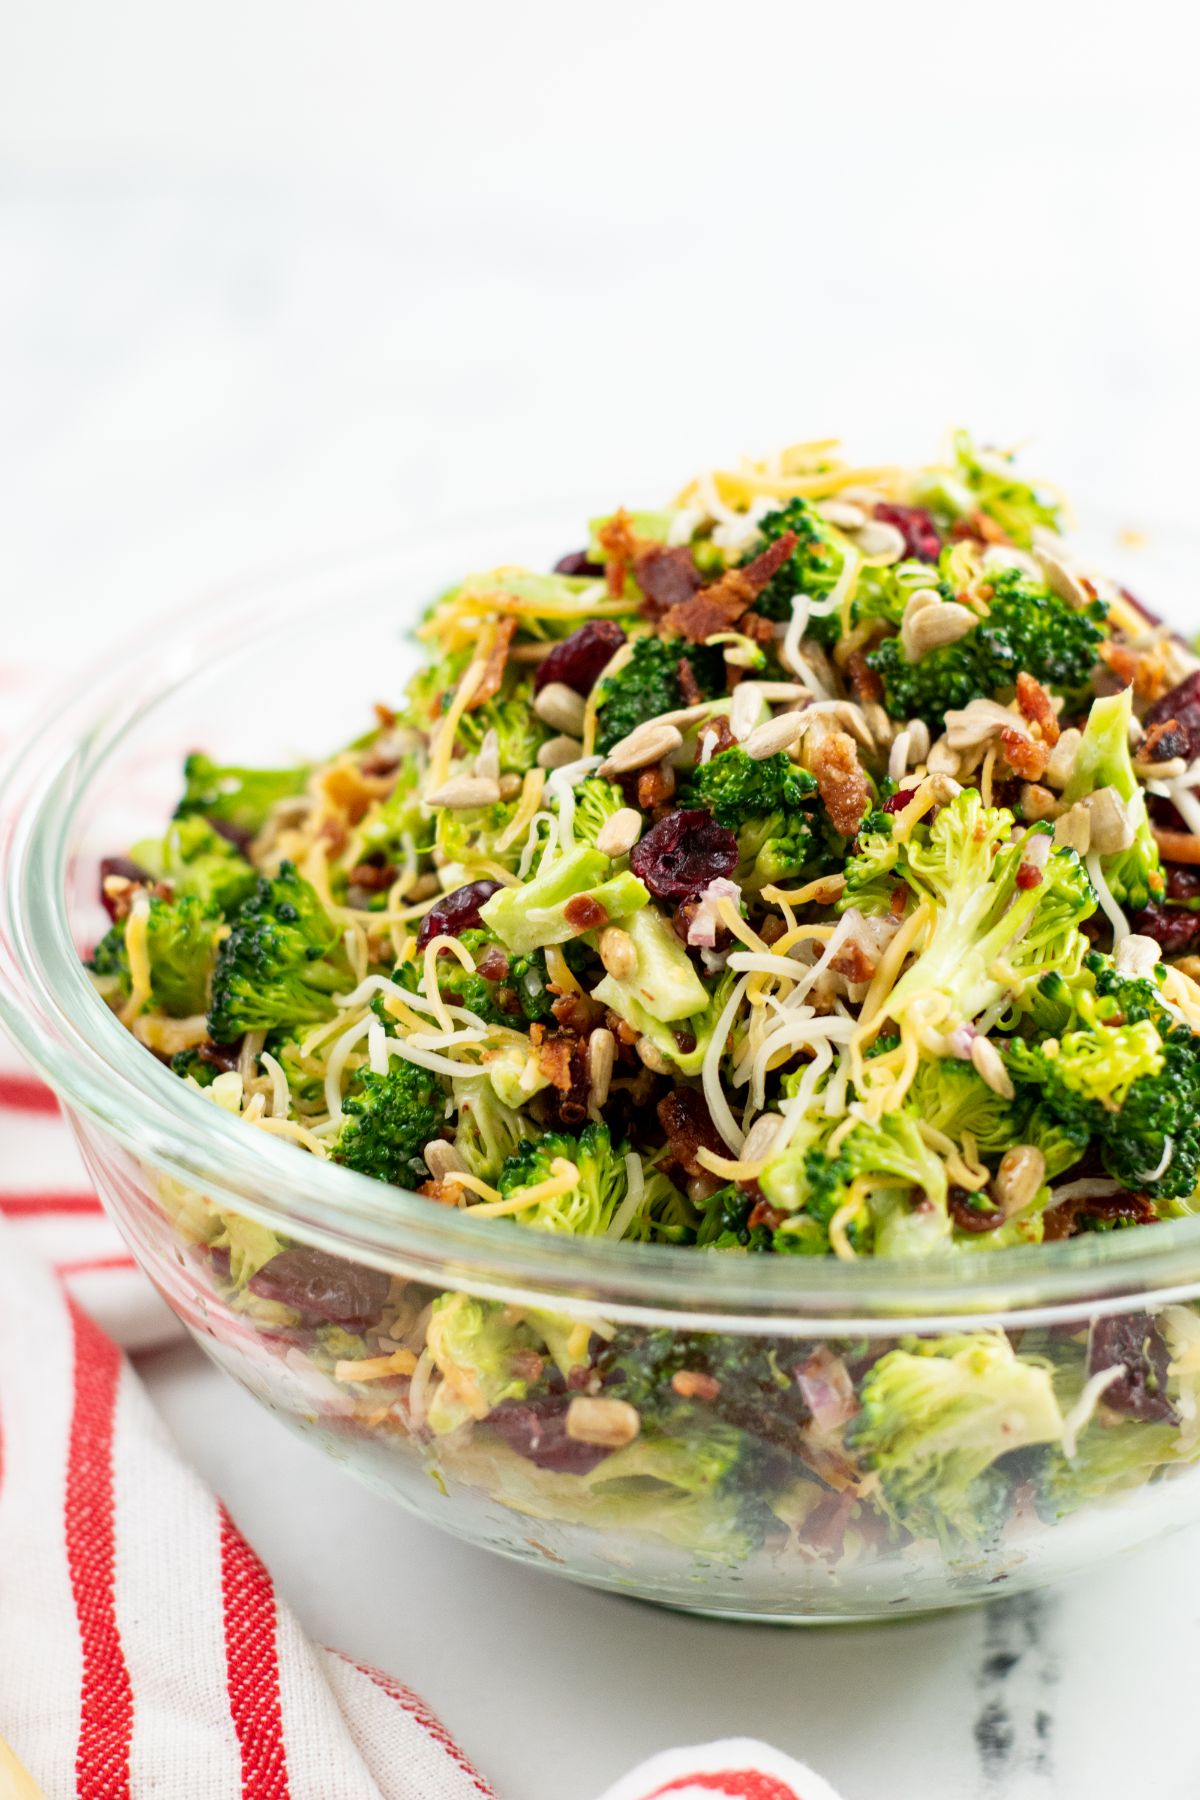 Broccoli Bacon and Cheese Salad in a glass bowl.